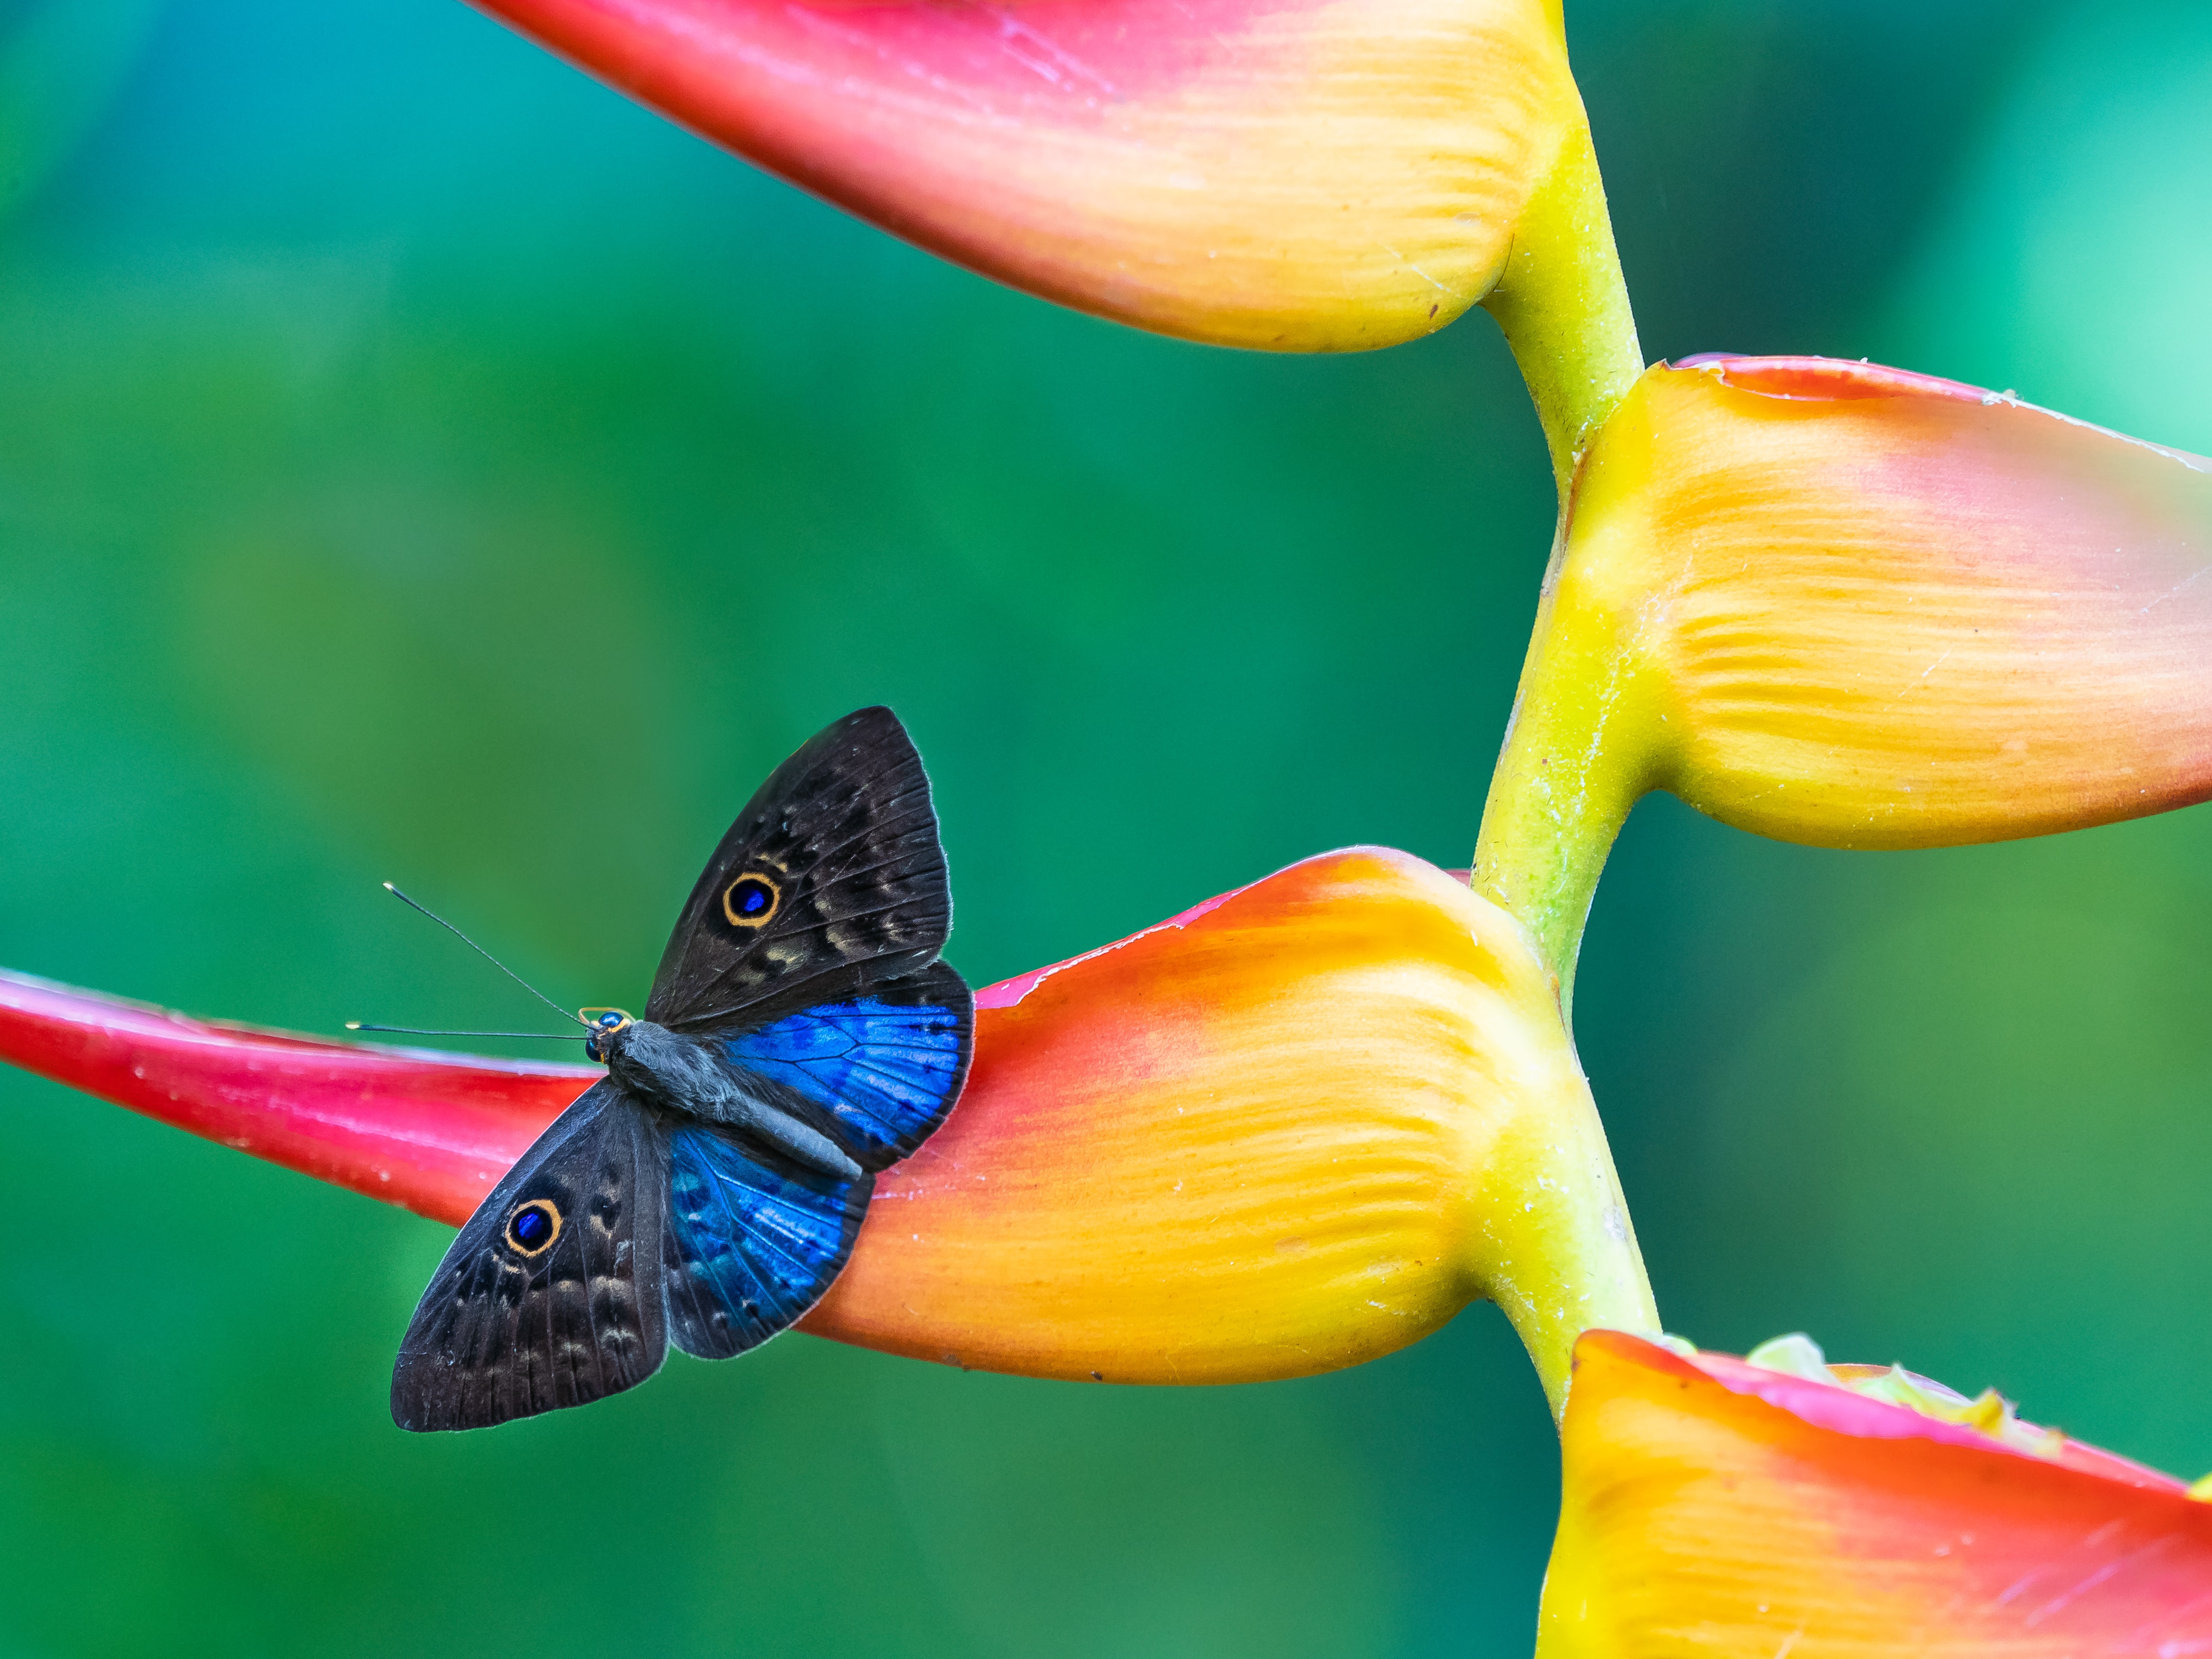 Blue-winged Eurybia butterfly resting on a Heliconia plant.